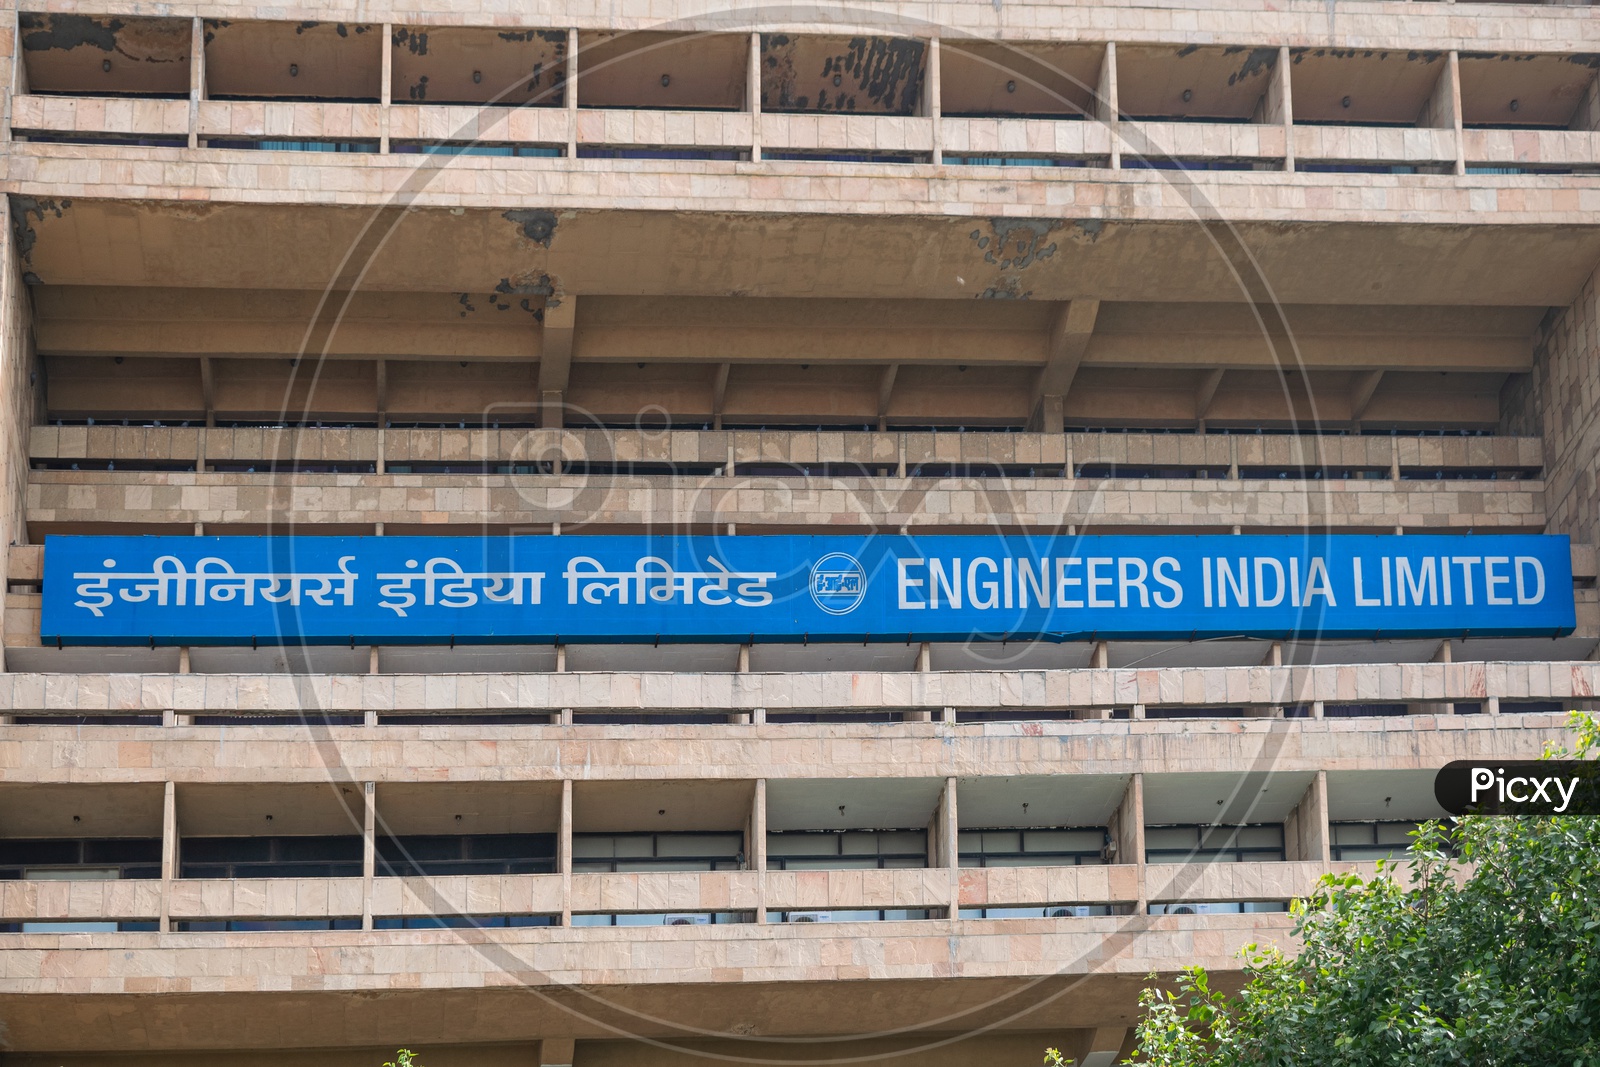 Engineers India Limited office building